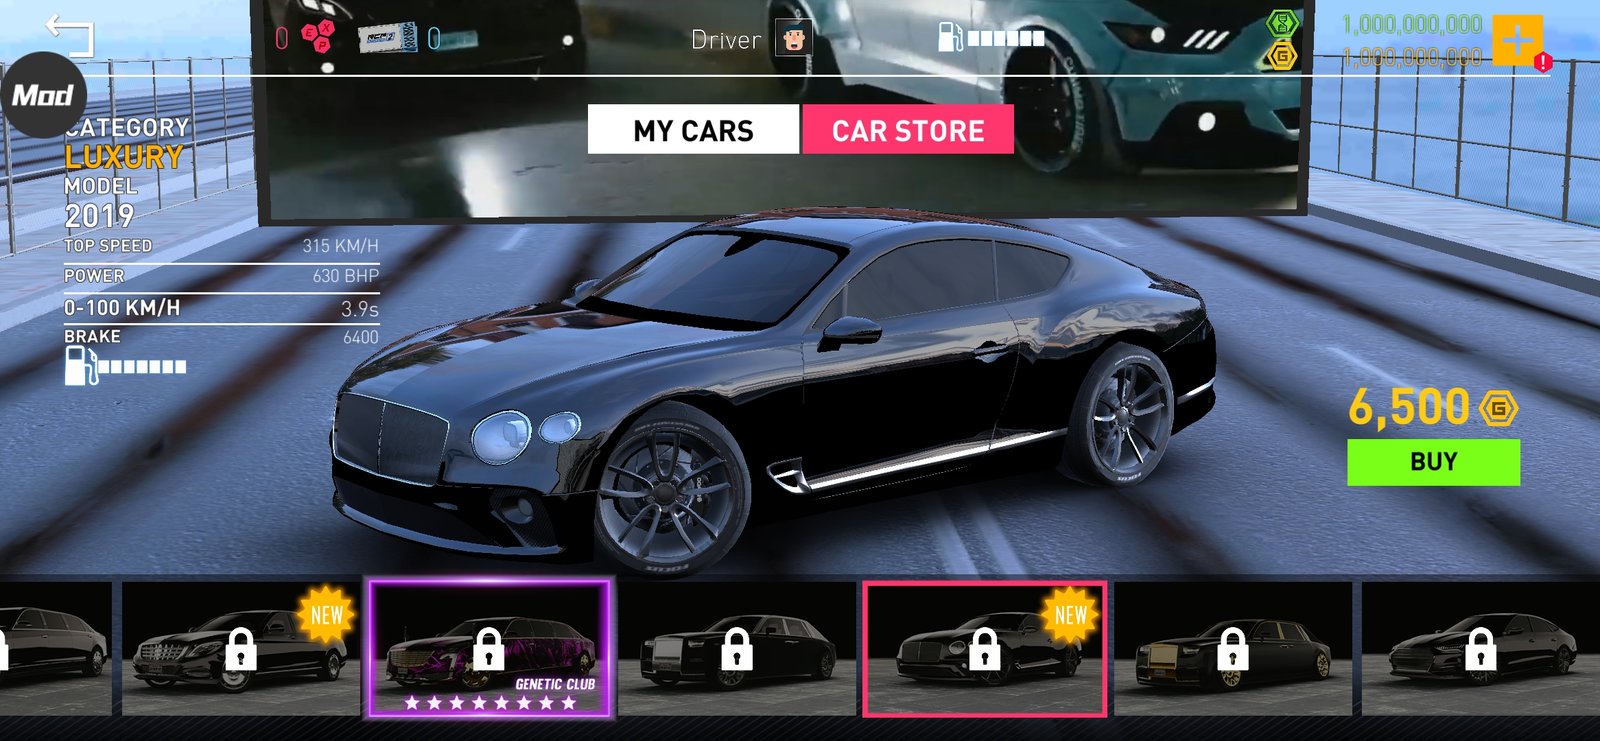 Real Car Parking 2 6.2.0 Apk + MOD (Money) + Data for Android